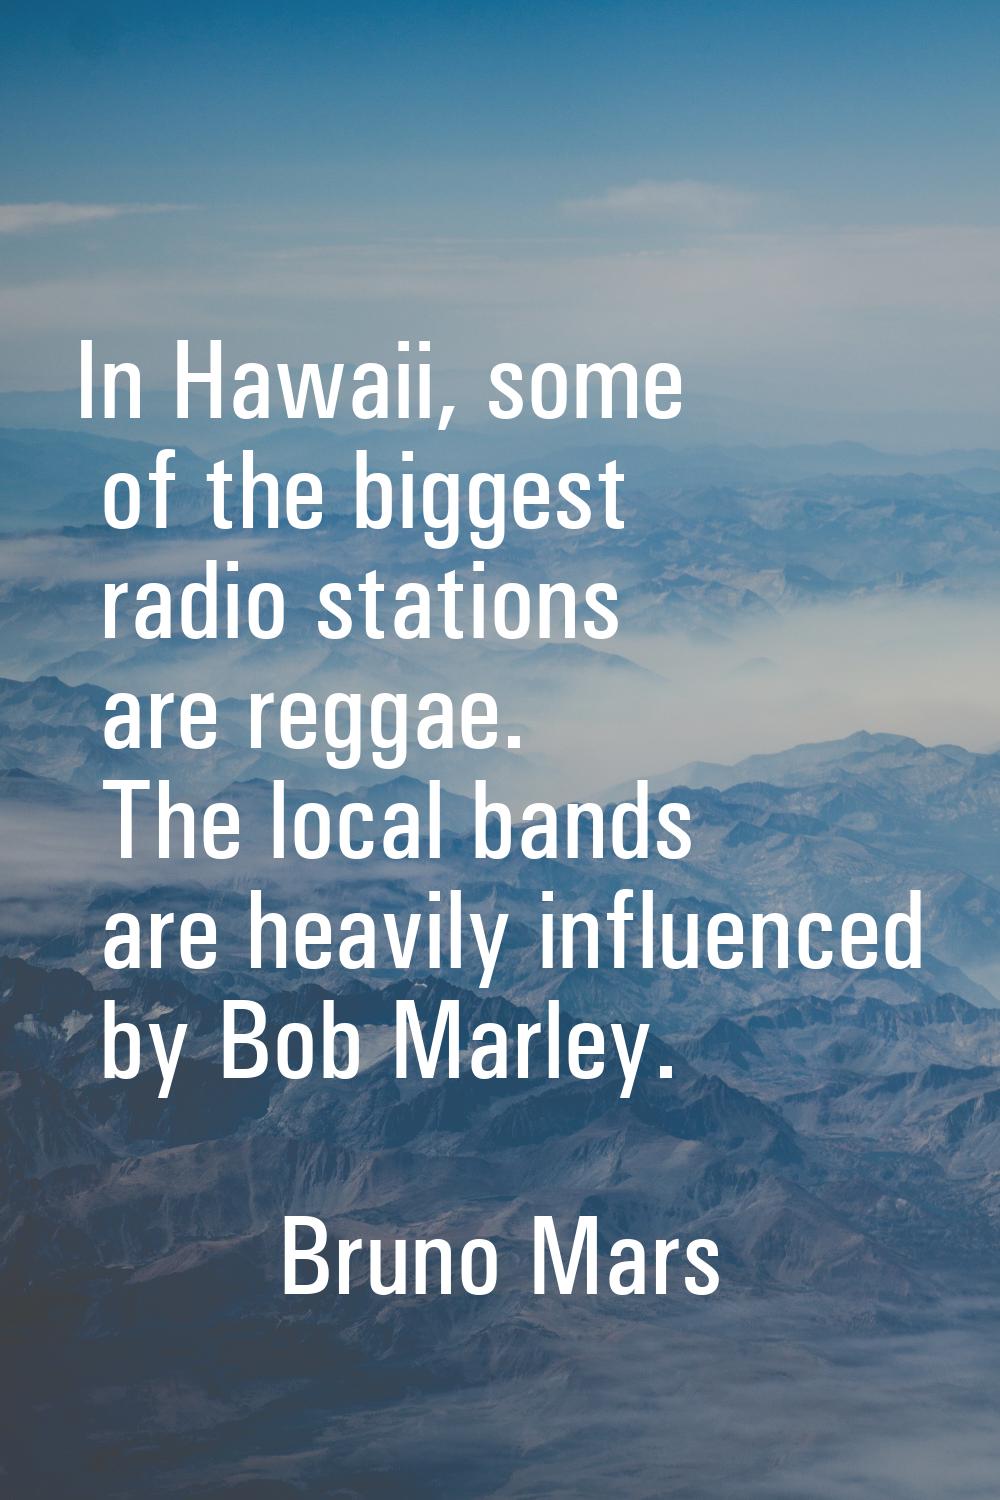 In Hawaii, some of the biggest radio stations are reggae. The local bands are heavily influenced by